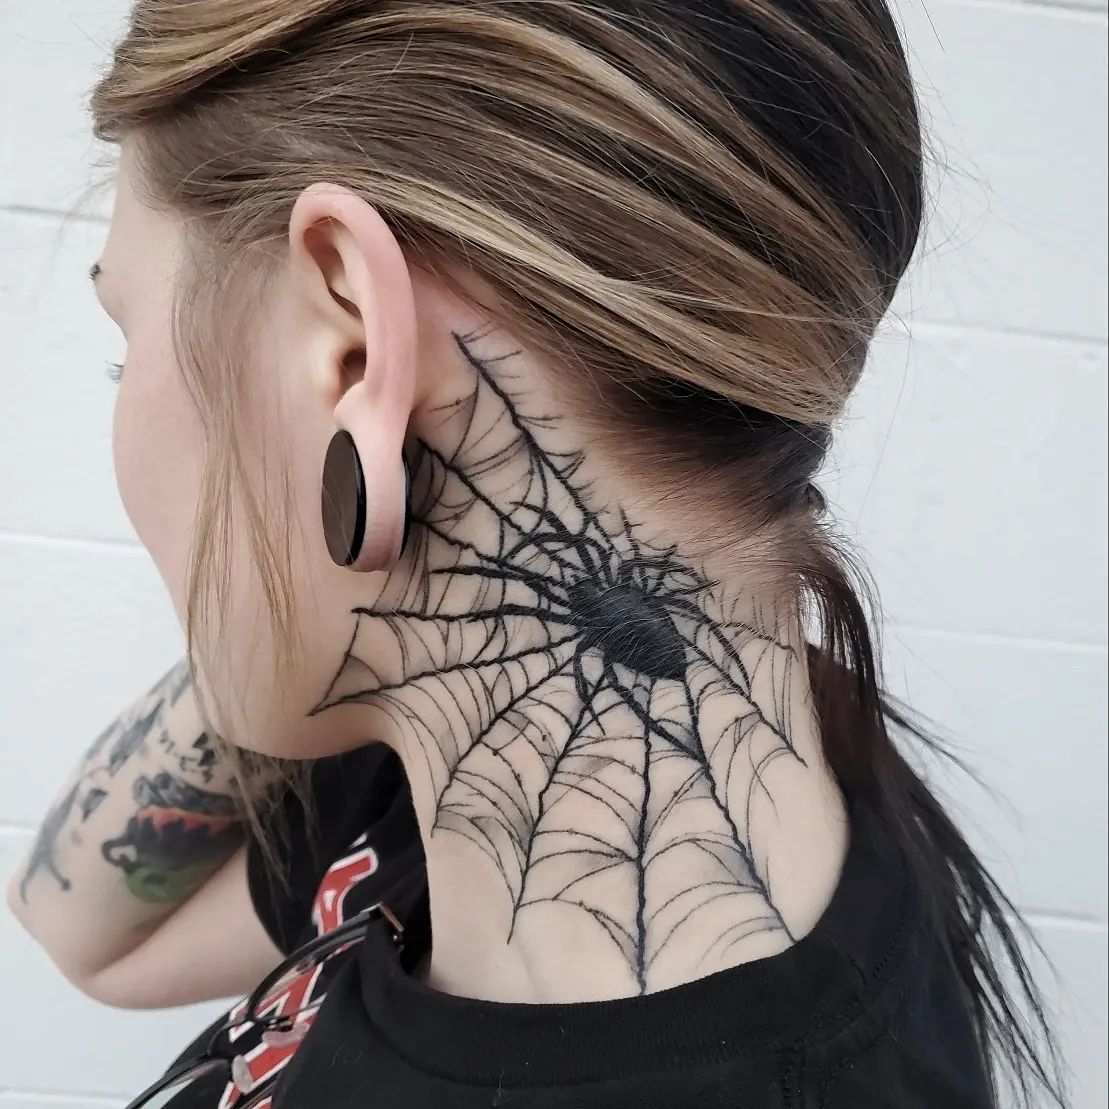 Spider Web Tattoo — Is It More Than Just a Prison Tattoo?